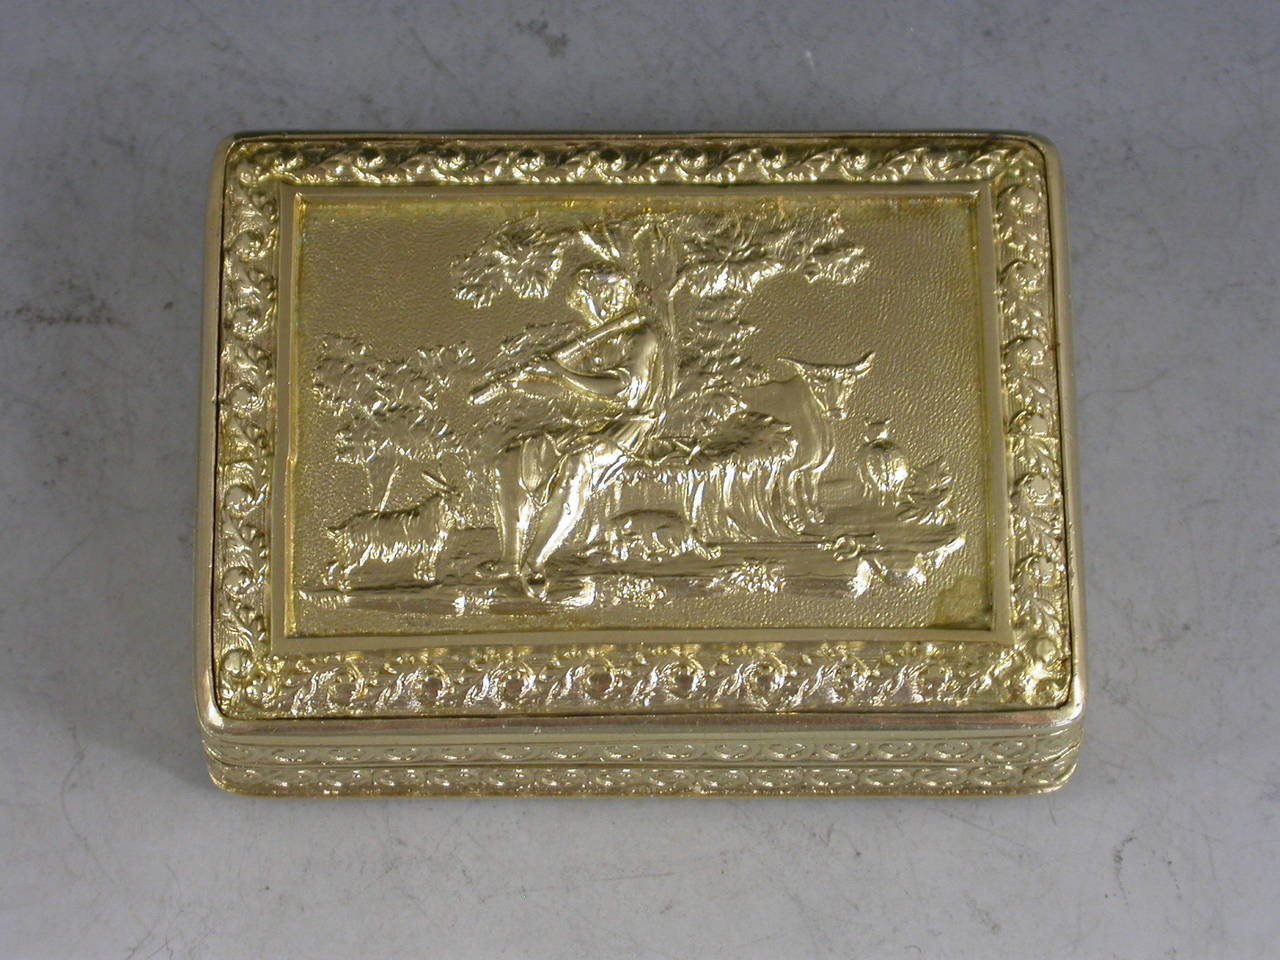 An exceptional George III silver gilt Vinaigrette of very large size and rectangular form with raised foliate borders, the plain base with engraved foliate border, the lid with a raised chased scene on a matt background depicting a Shepherd Boy